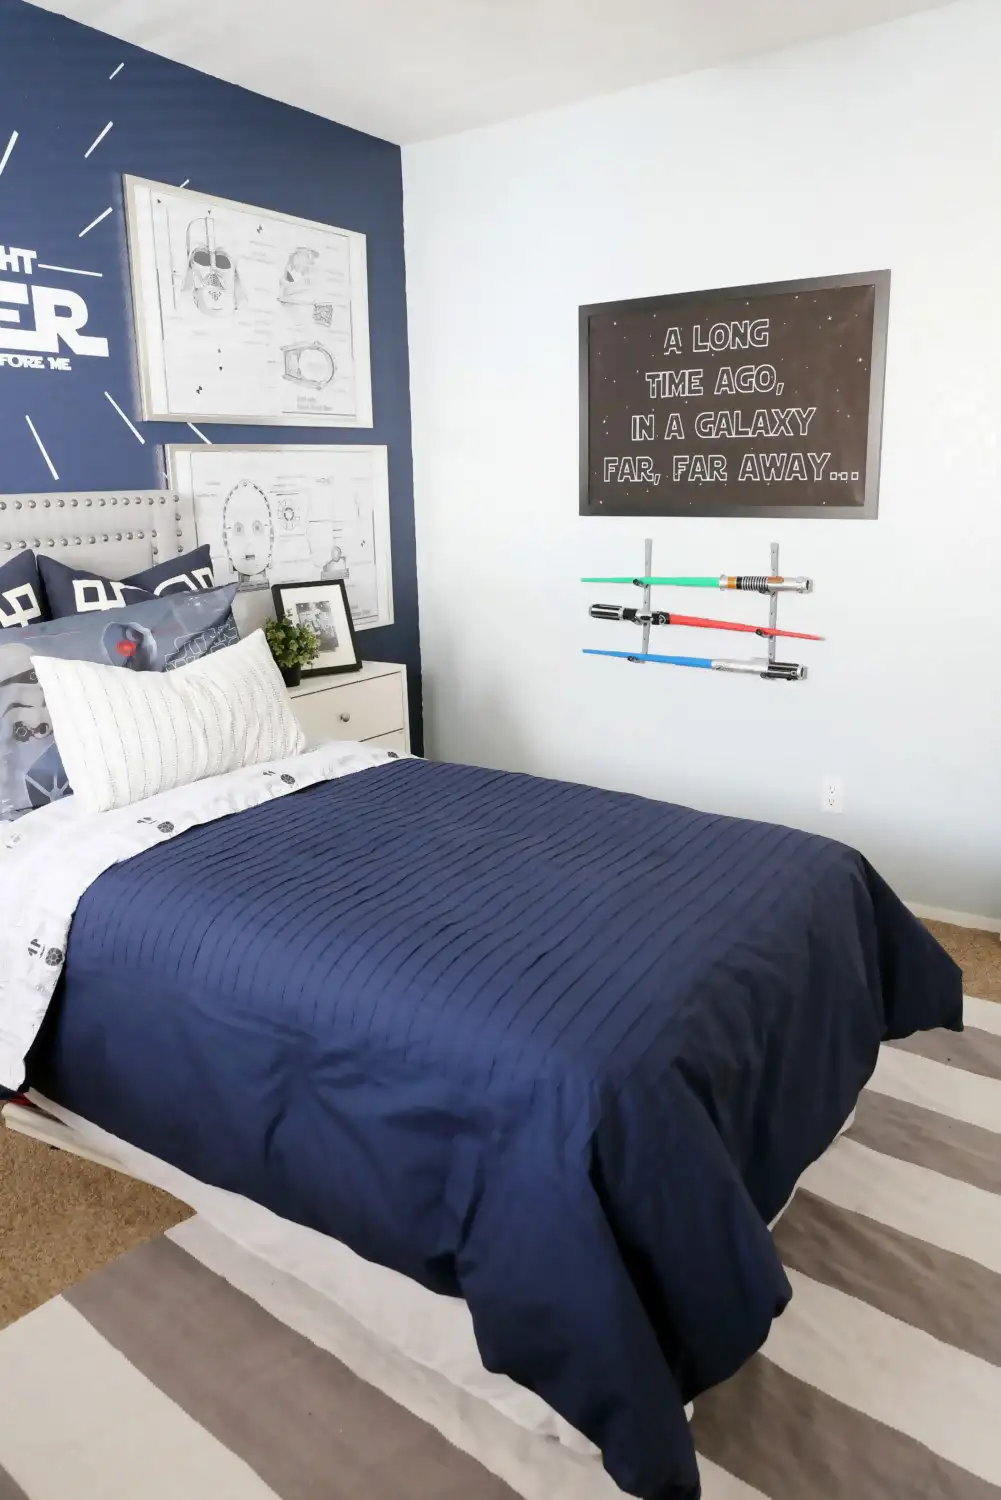 Awesome Star Wars-Themed Children’s Bedroom